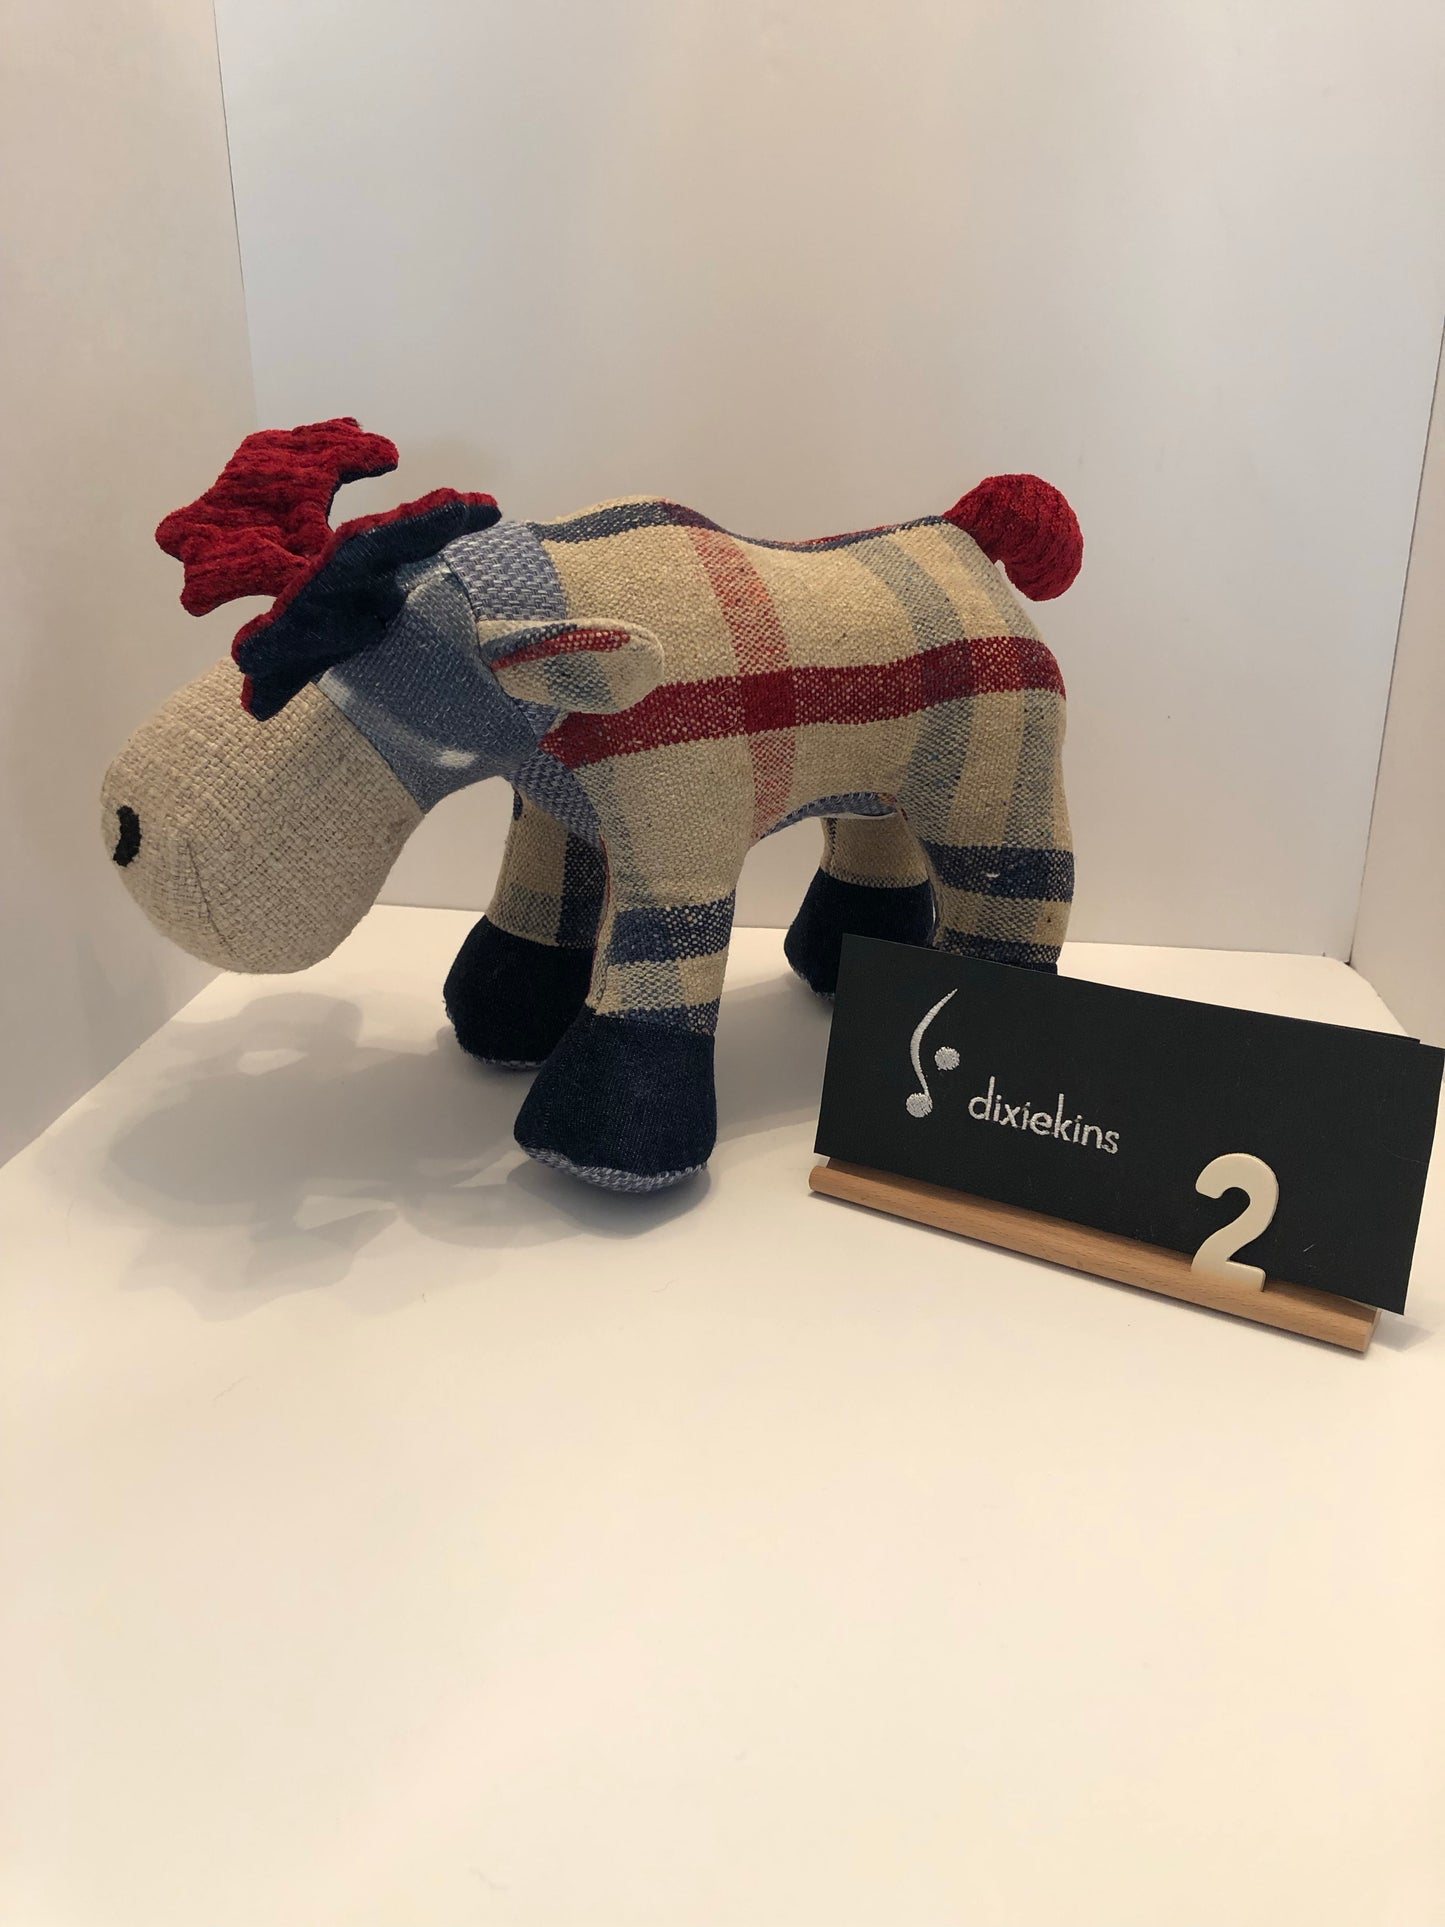 02. Striped Wool Moose - One of a Kind